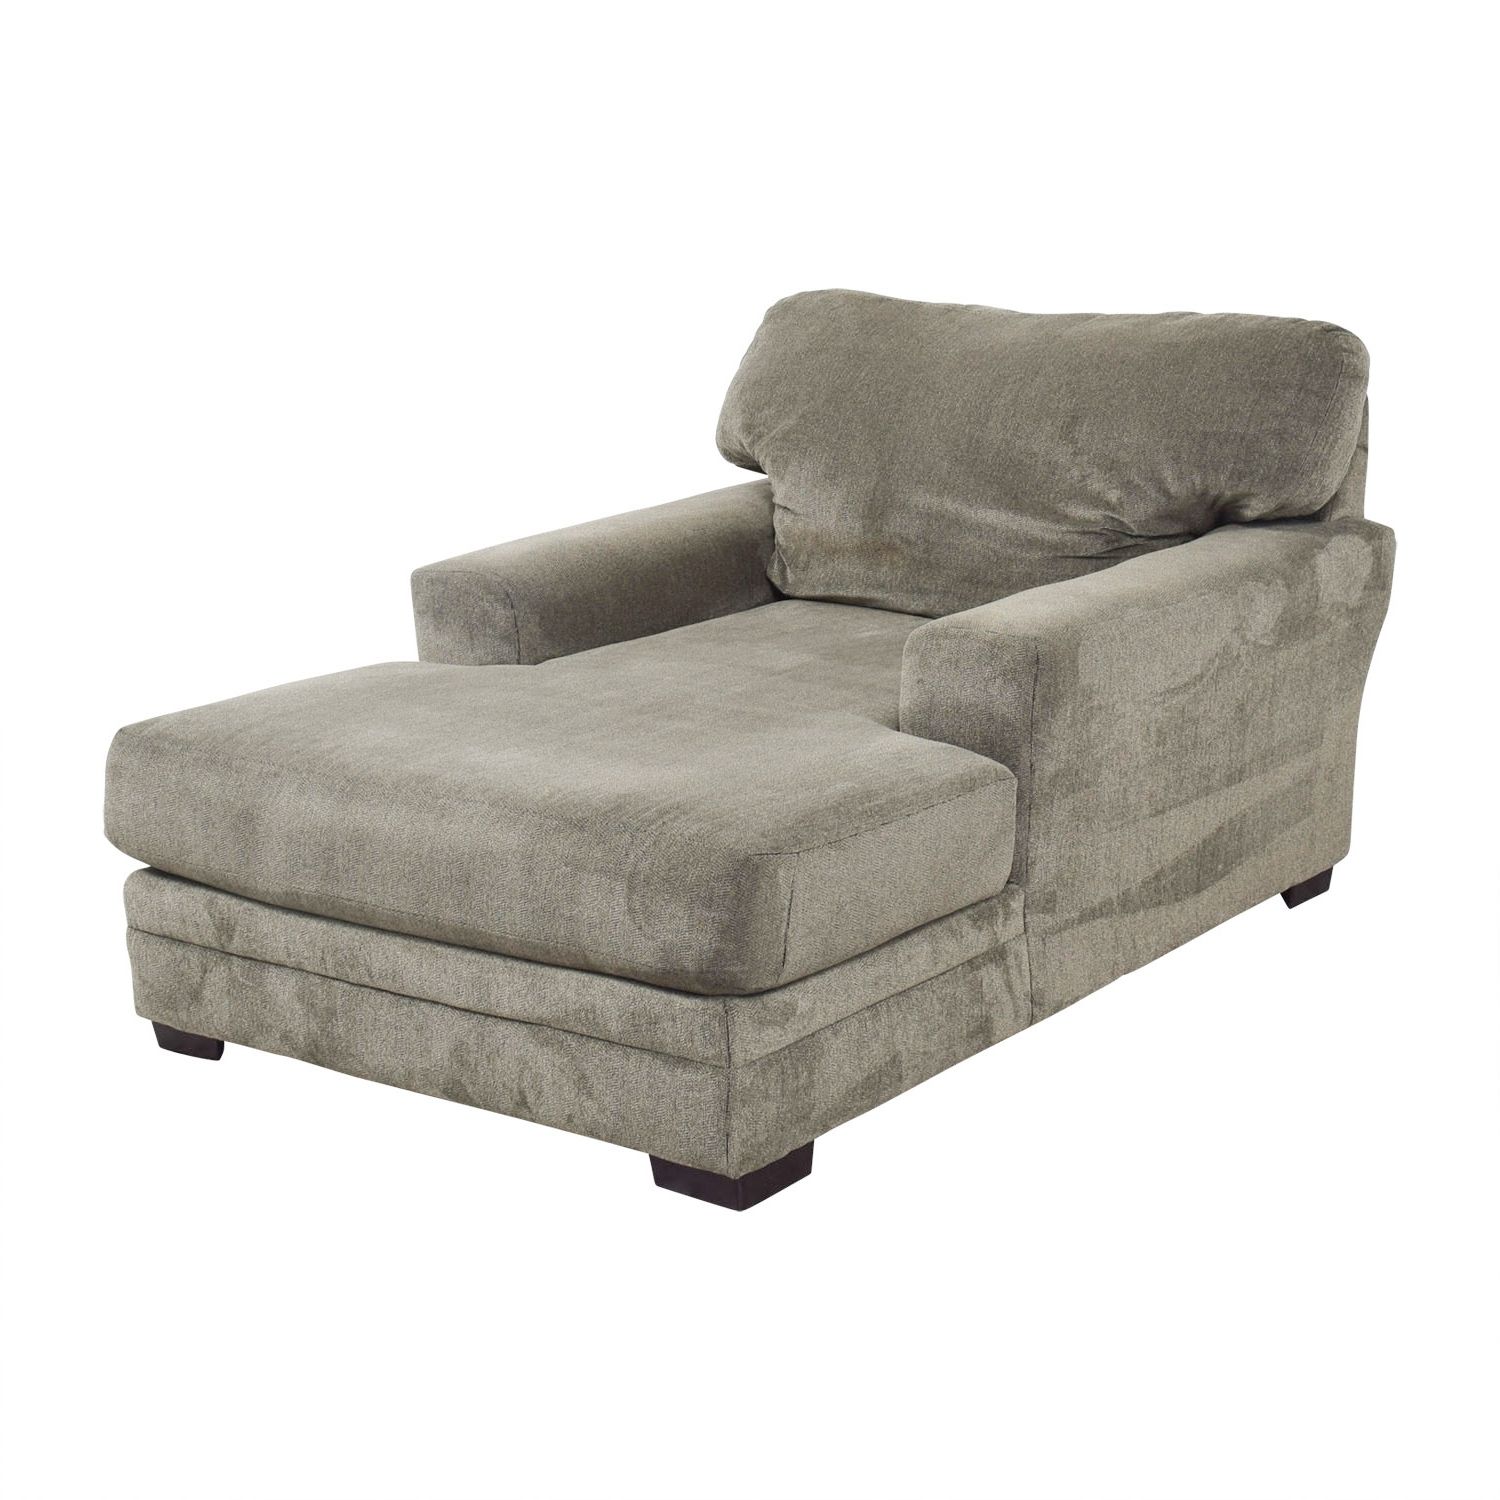 [%81% Off – Bob's Furniture Bob's Furniture Grey Chaise Lounge / Sofas Throughout Latest Bobs Furniture Chaises|bobs Furniture Chaises For Preferred 81% Off – Bob's Furniture Bob's Furniture Grey Chaise Lounge / Sofas|current Bobs Furniture Chaises With 81% Off – Bob's Furniture Bob's Furniture Grey Chaise Lounge / Sofas|most Recent 81% Off – Bob's Furniture Bob's Furniture Grey Chaise Lounge / Sofas Within Bobs Furniture Chaises%] (Photo 1 of 15)